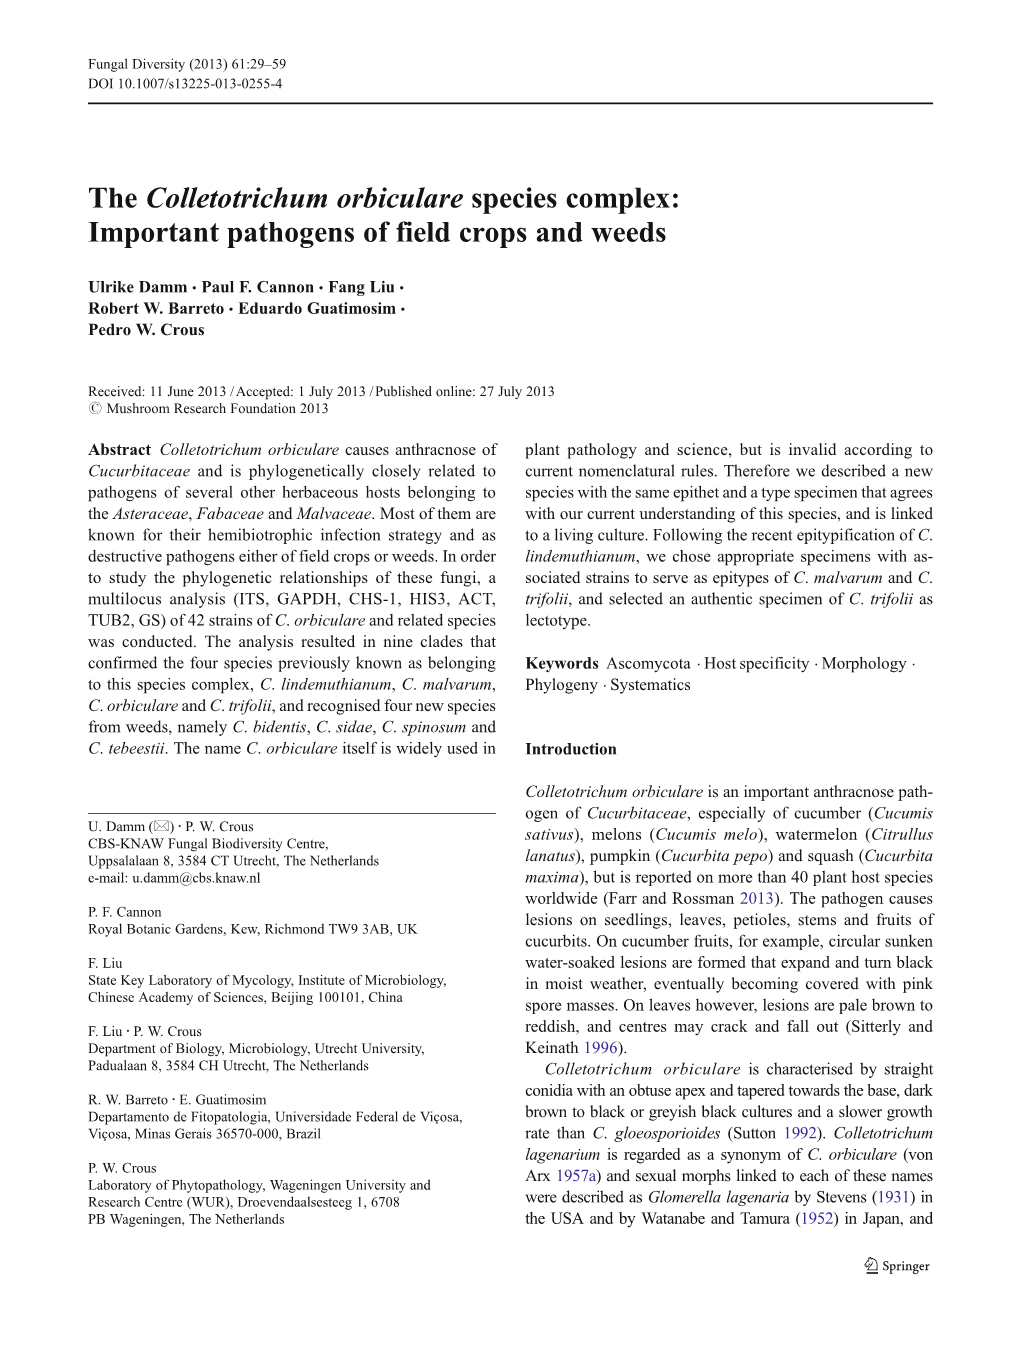 The Colletotrichum Orbiculare Species Complex: Important Pathogens of Field Crops and Weeds